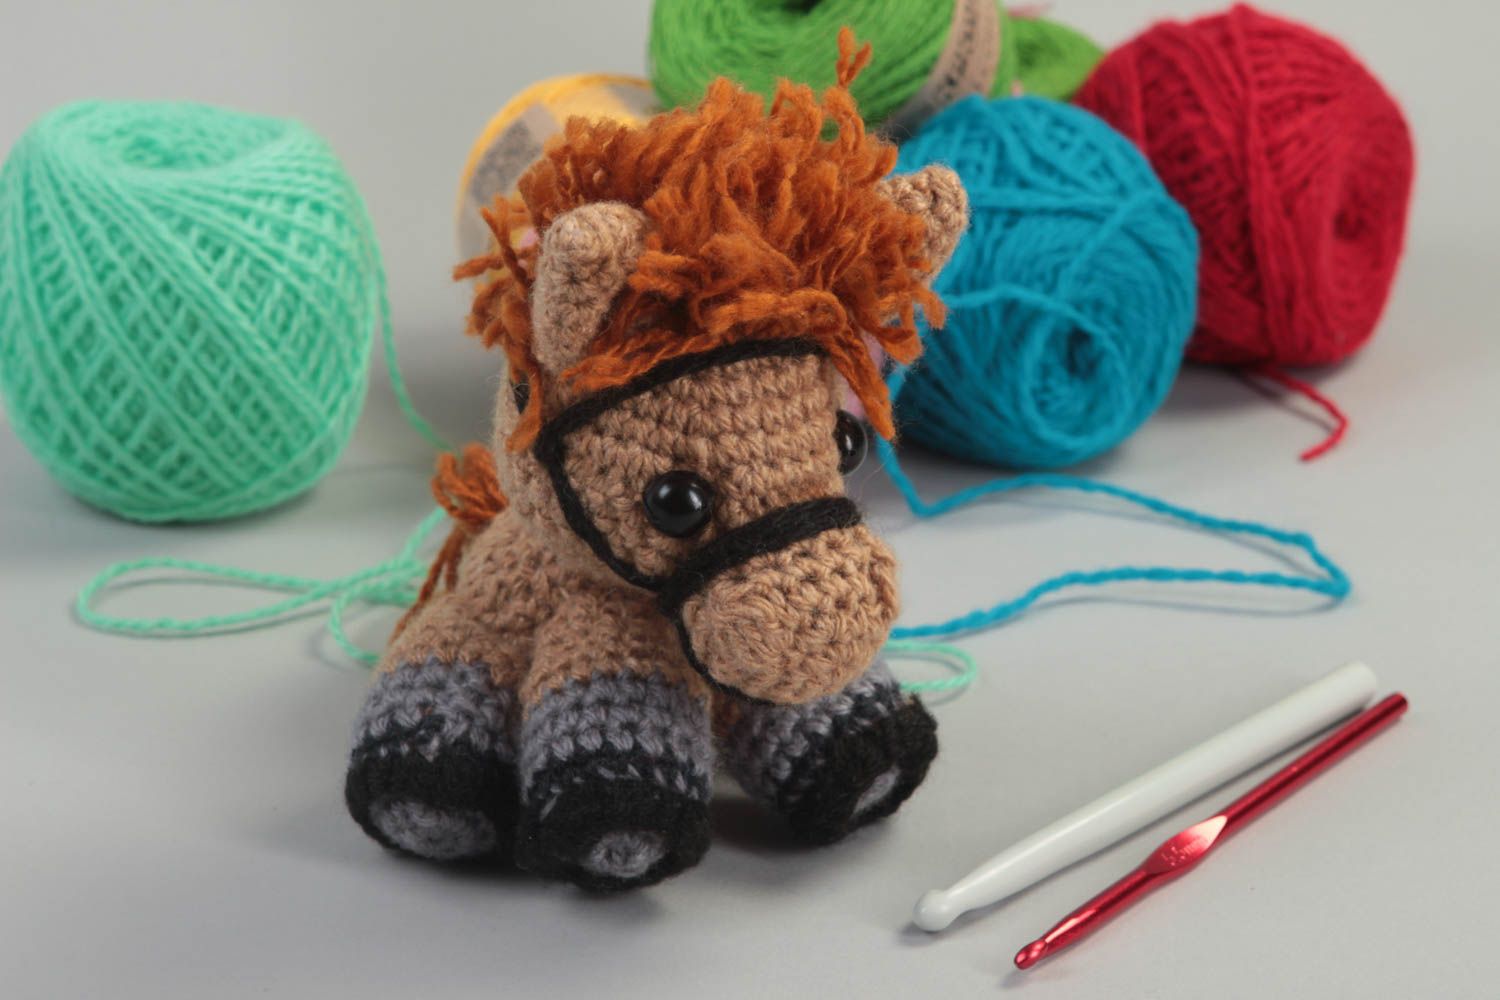 Miniature handmade soft toy stuffed toy for kids crochet horse toy gift ideas photo 1